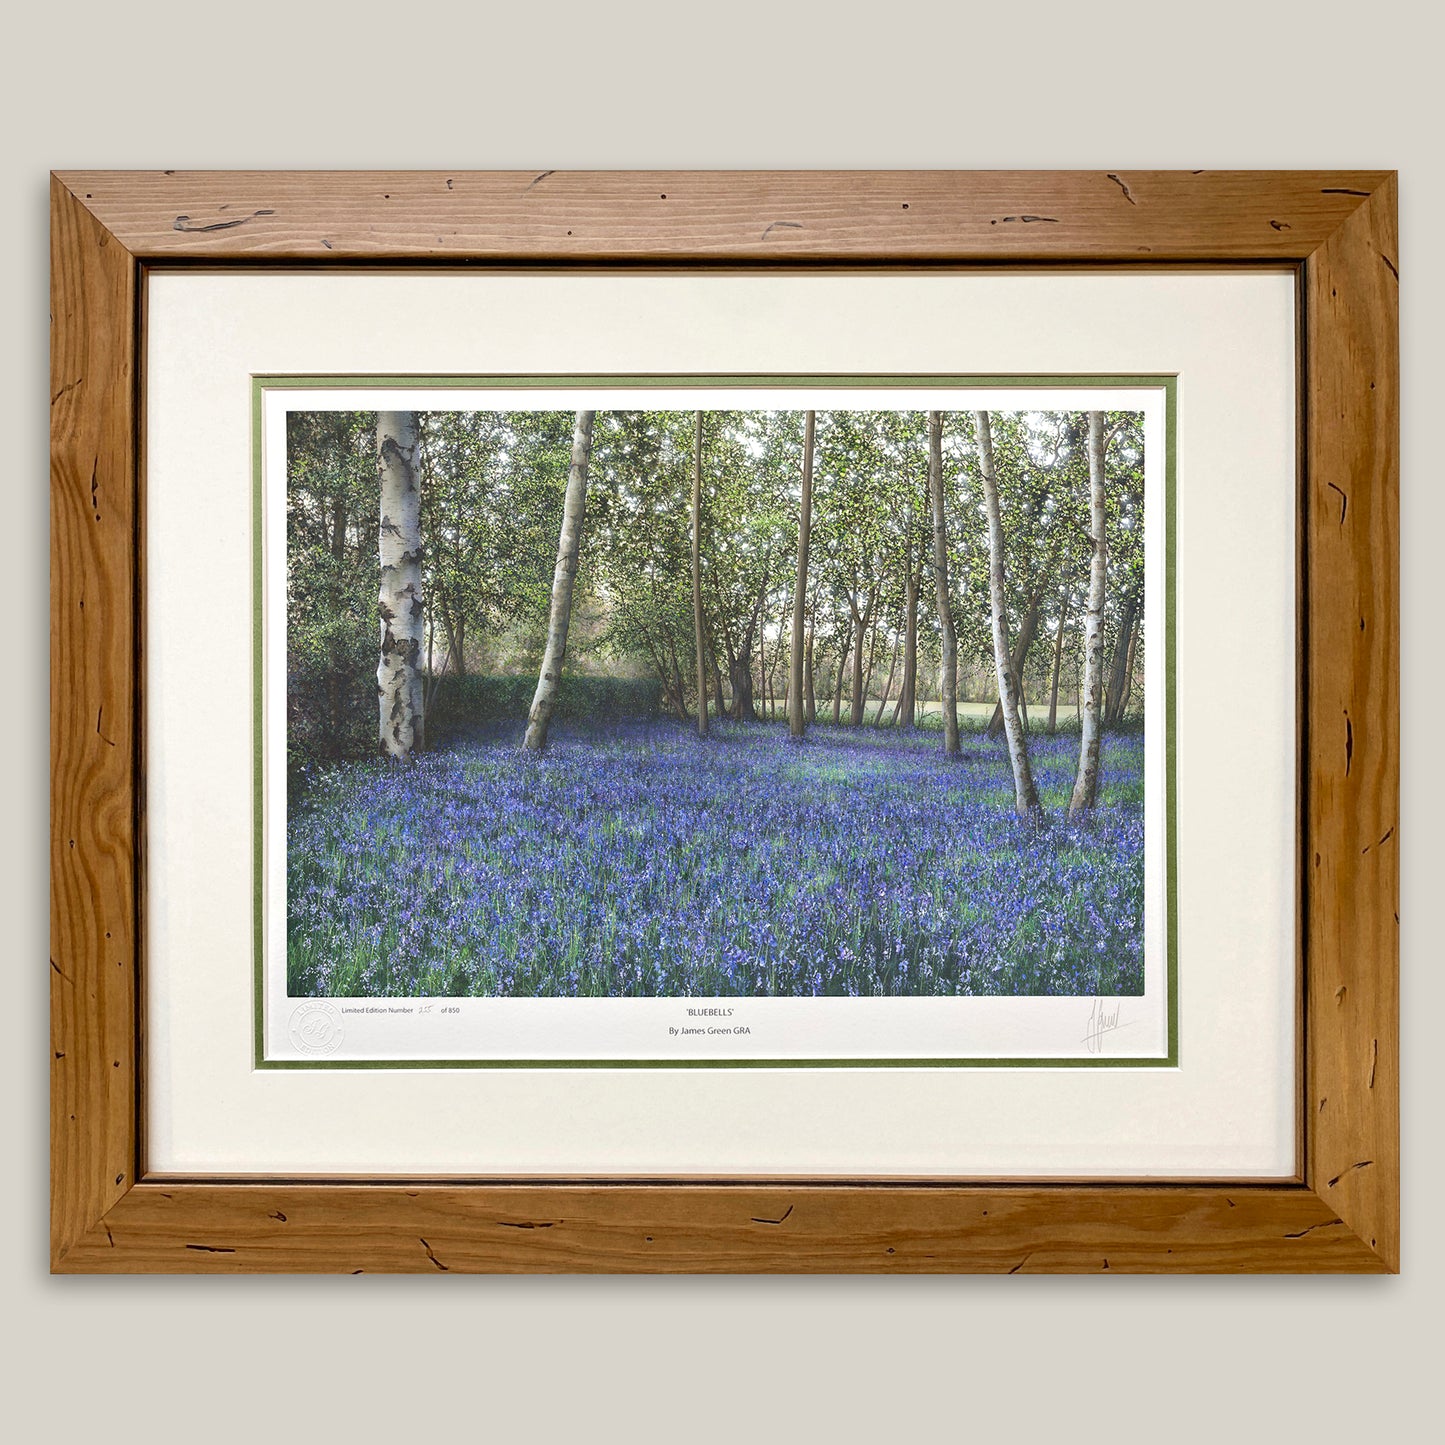 Picture of daft as a brush gardens framed in a pine moulding